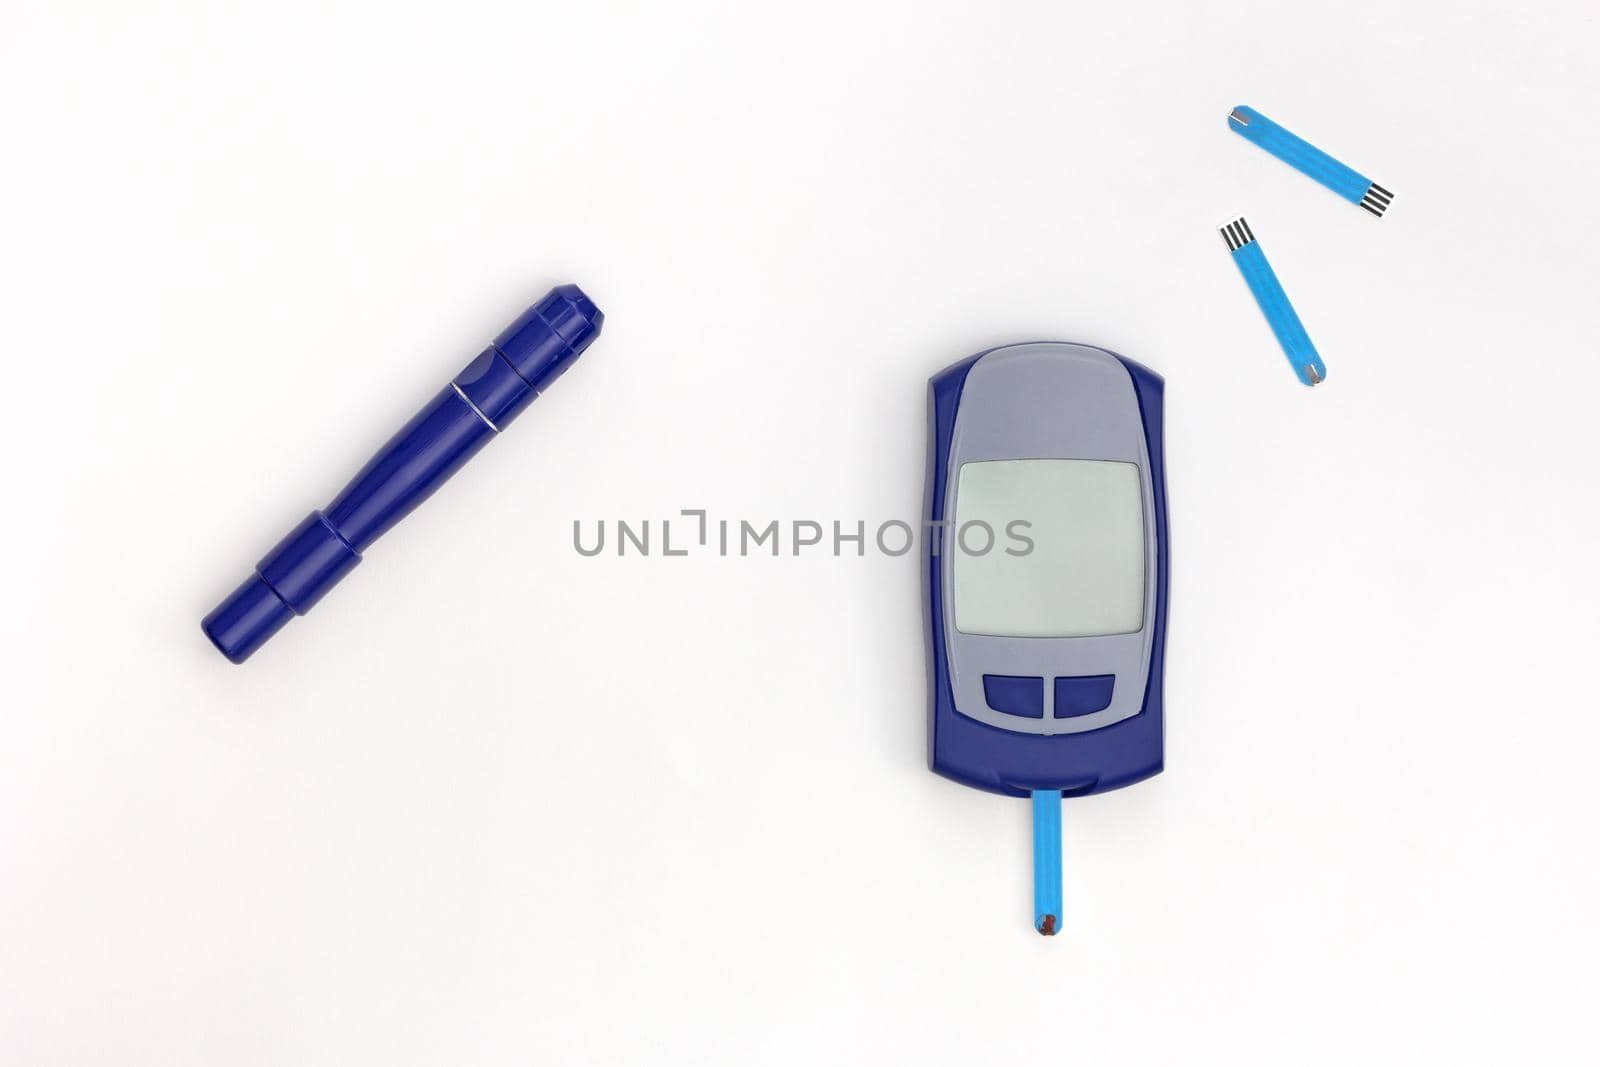 Top view of glucometer with blooded test strip inside and empty display, lancet and test strips on white background